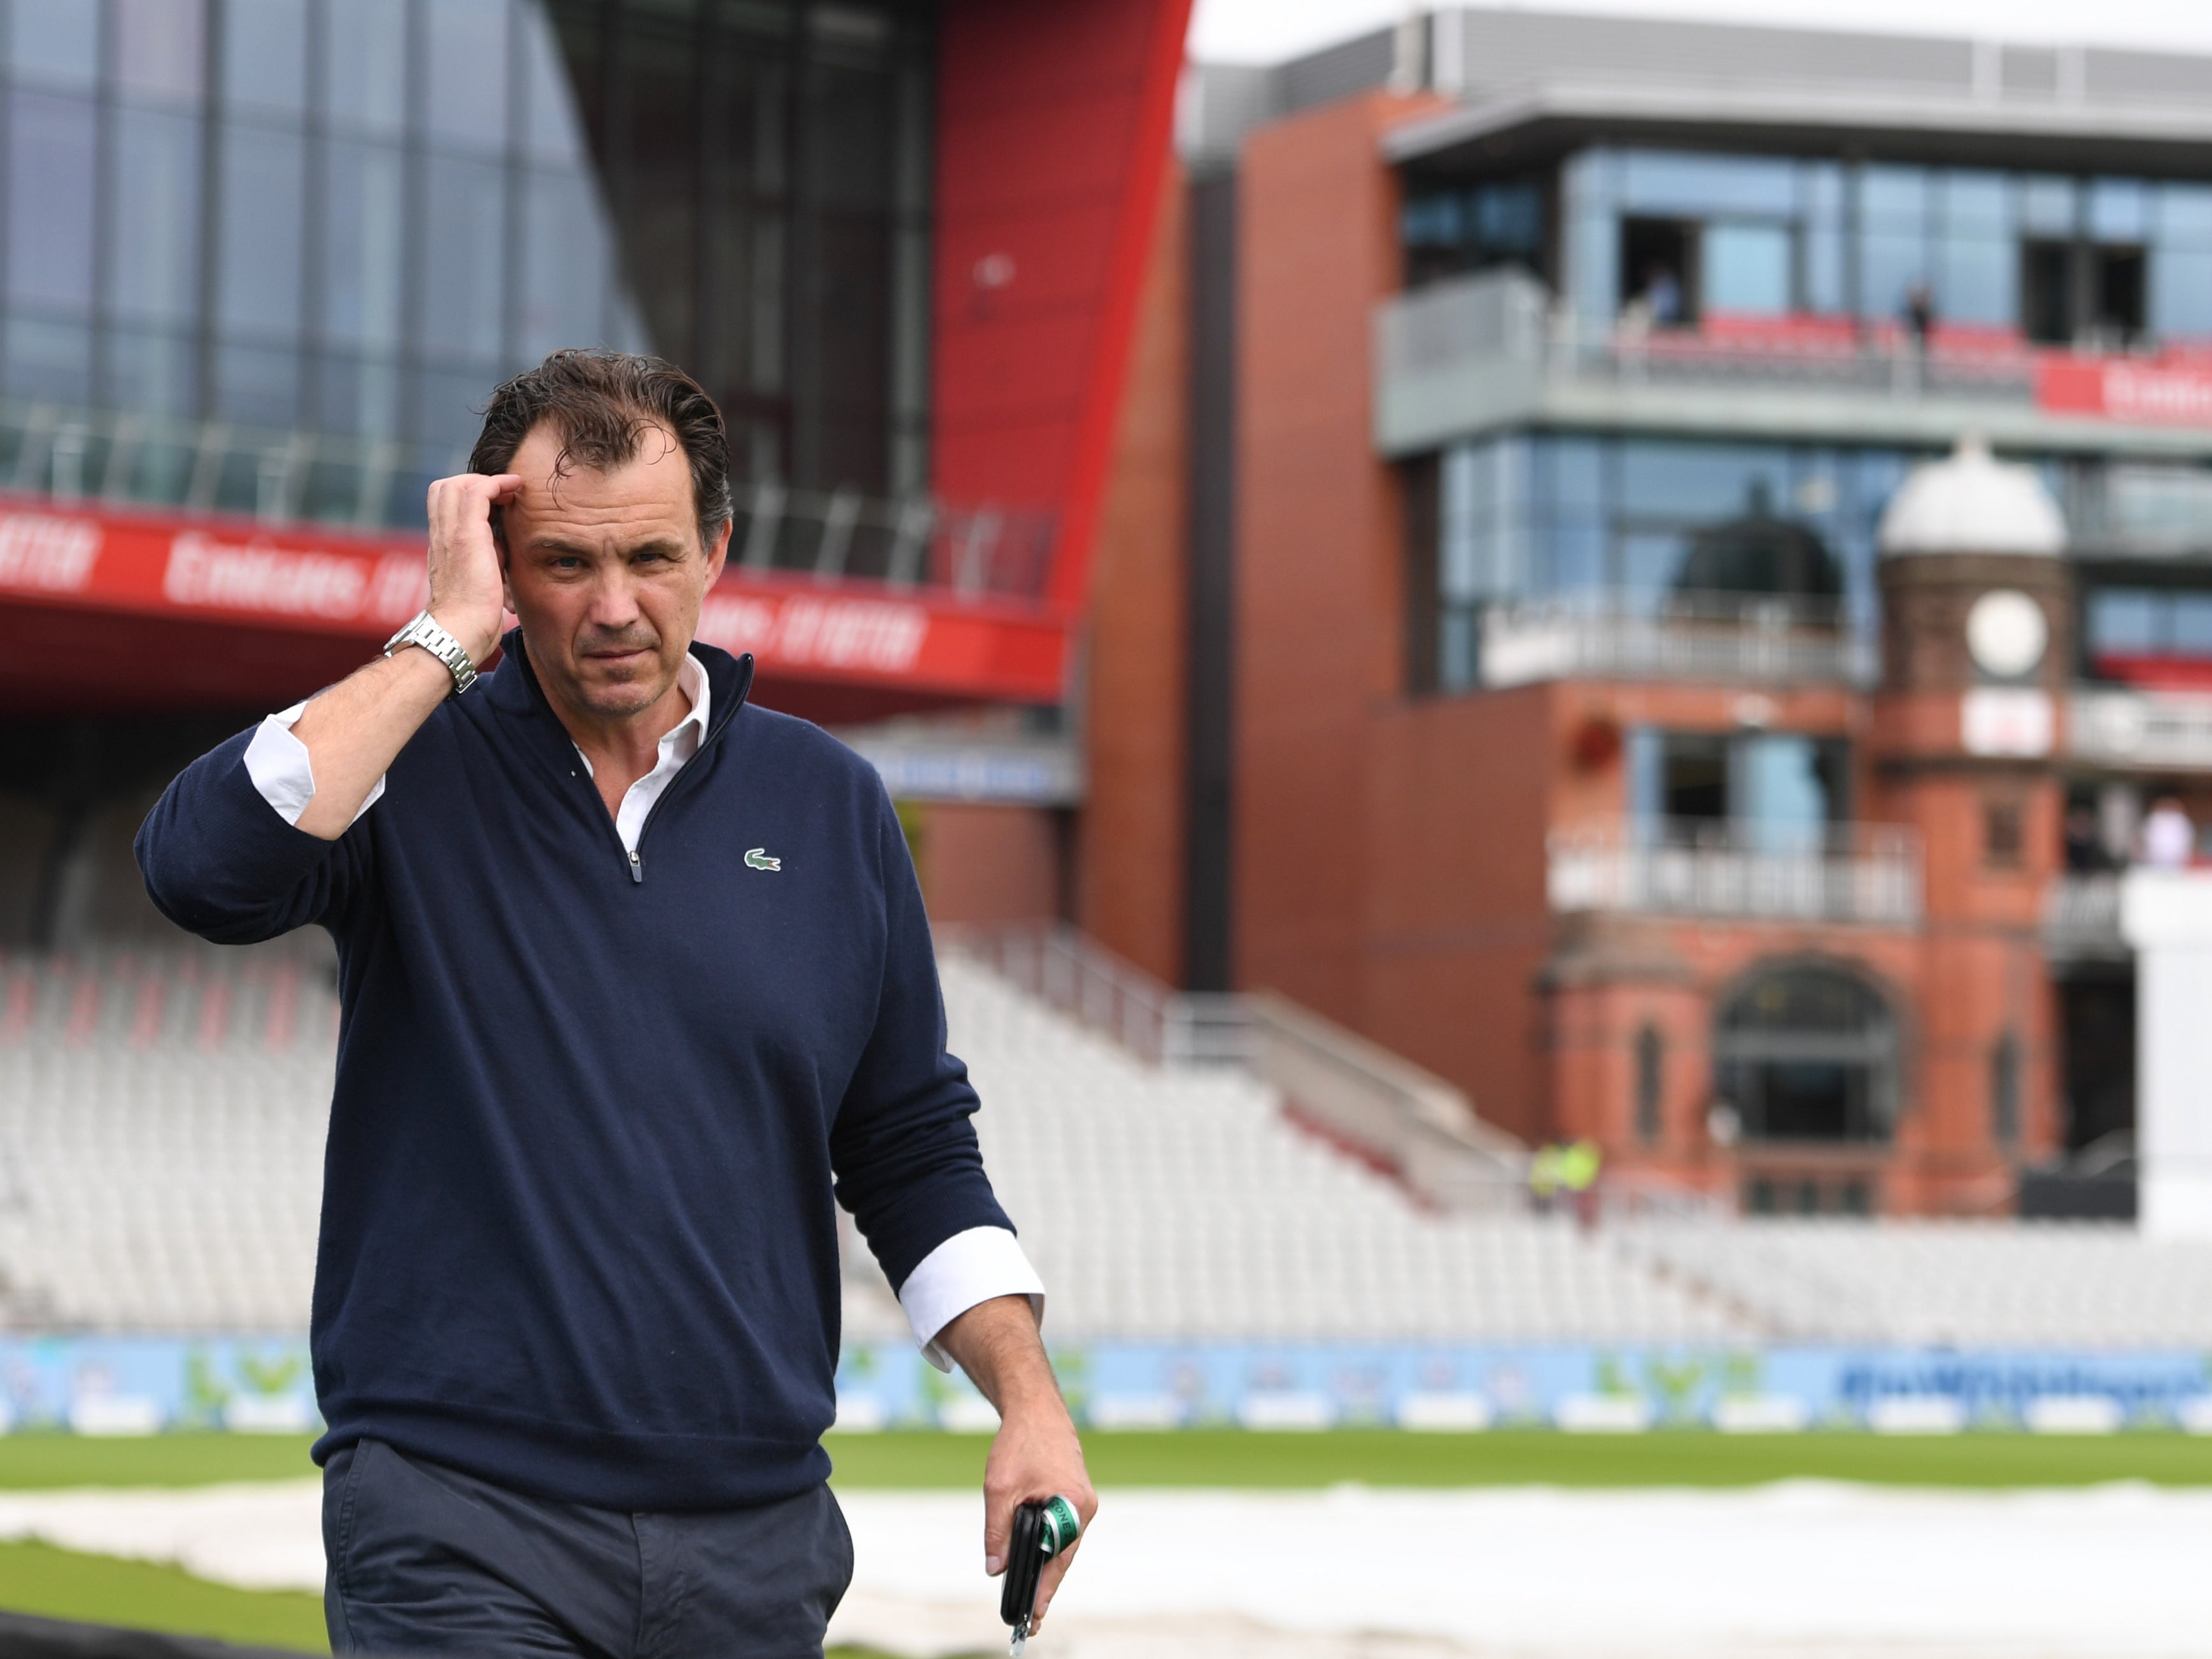 ECB chief executive Tom Harrison admitted the ECB’s 12-point plan could have been firmer